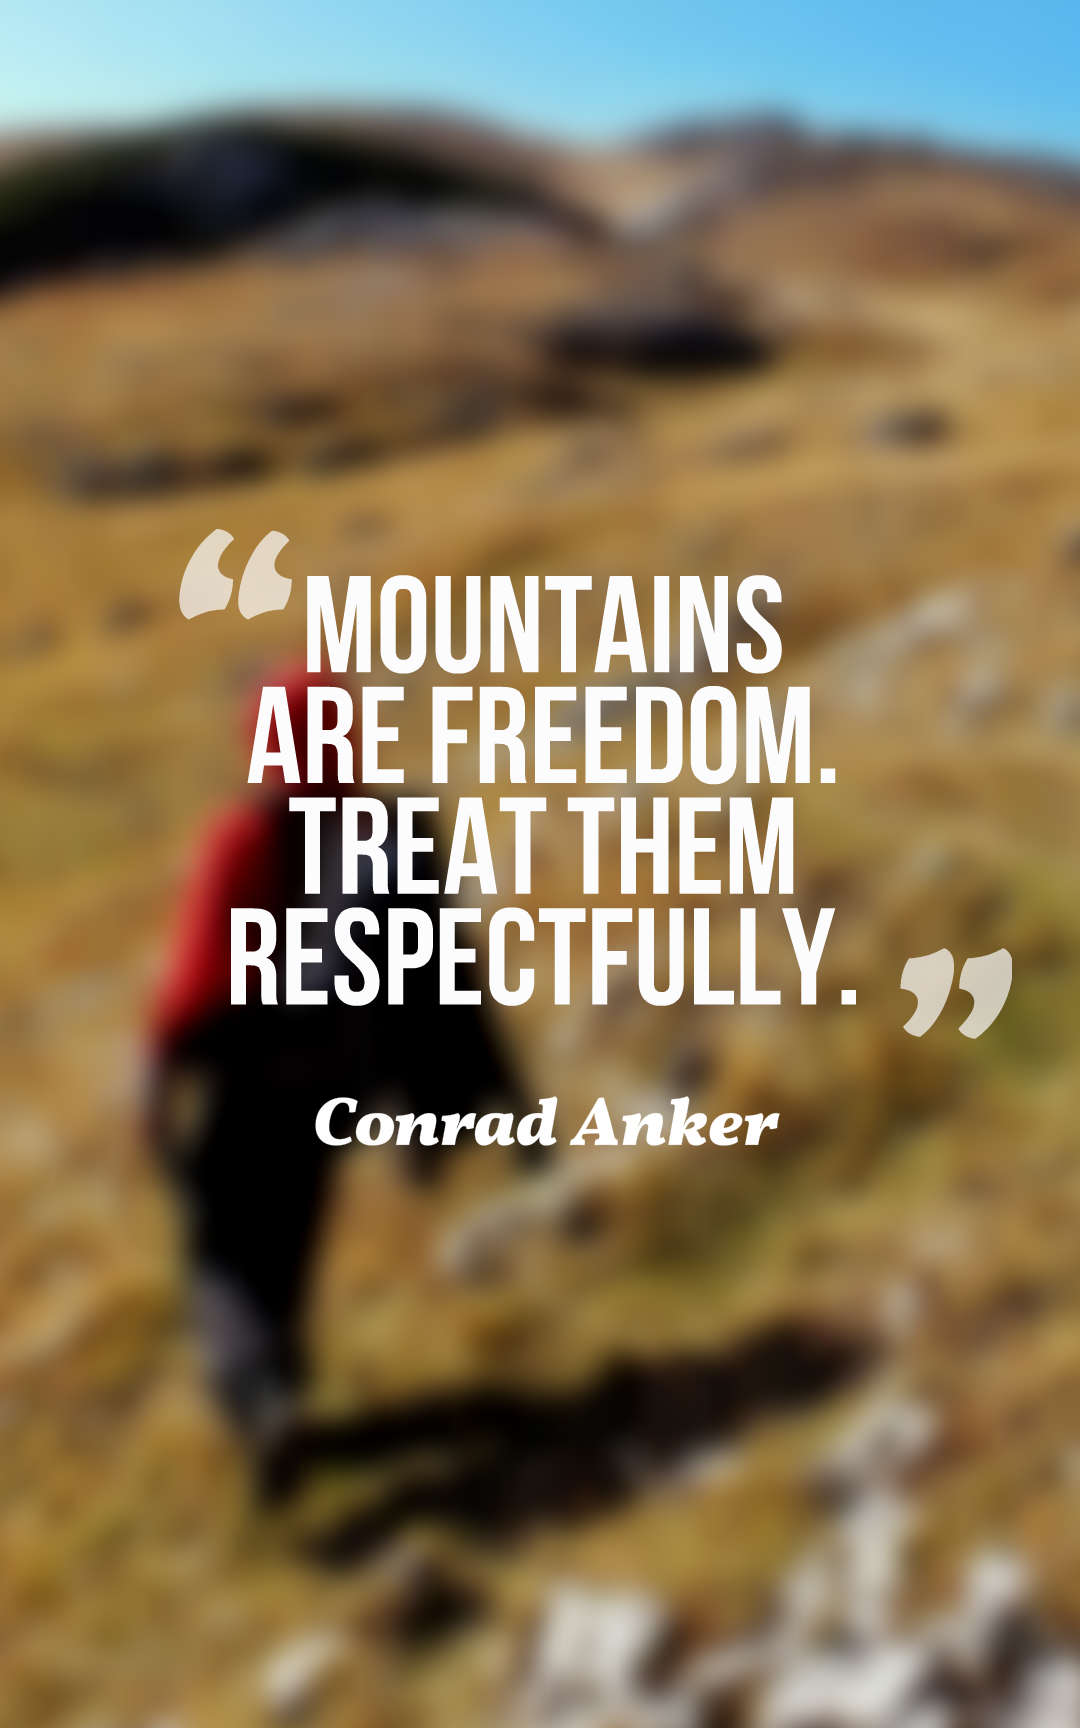 Mountains are freedom. Treat them respectfully.